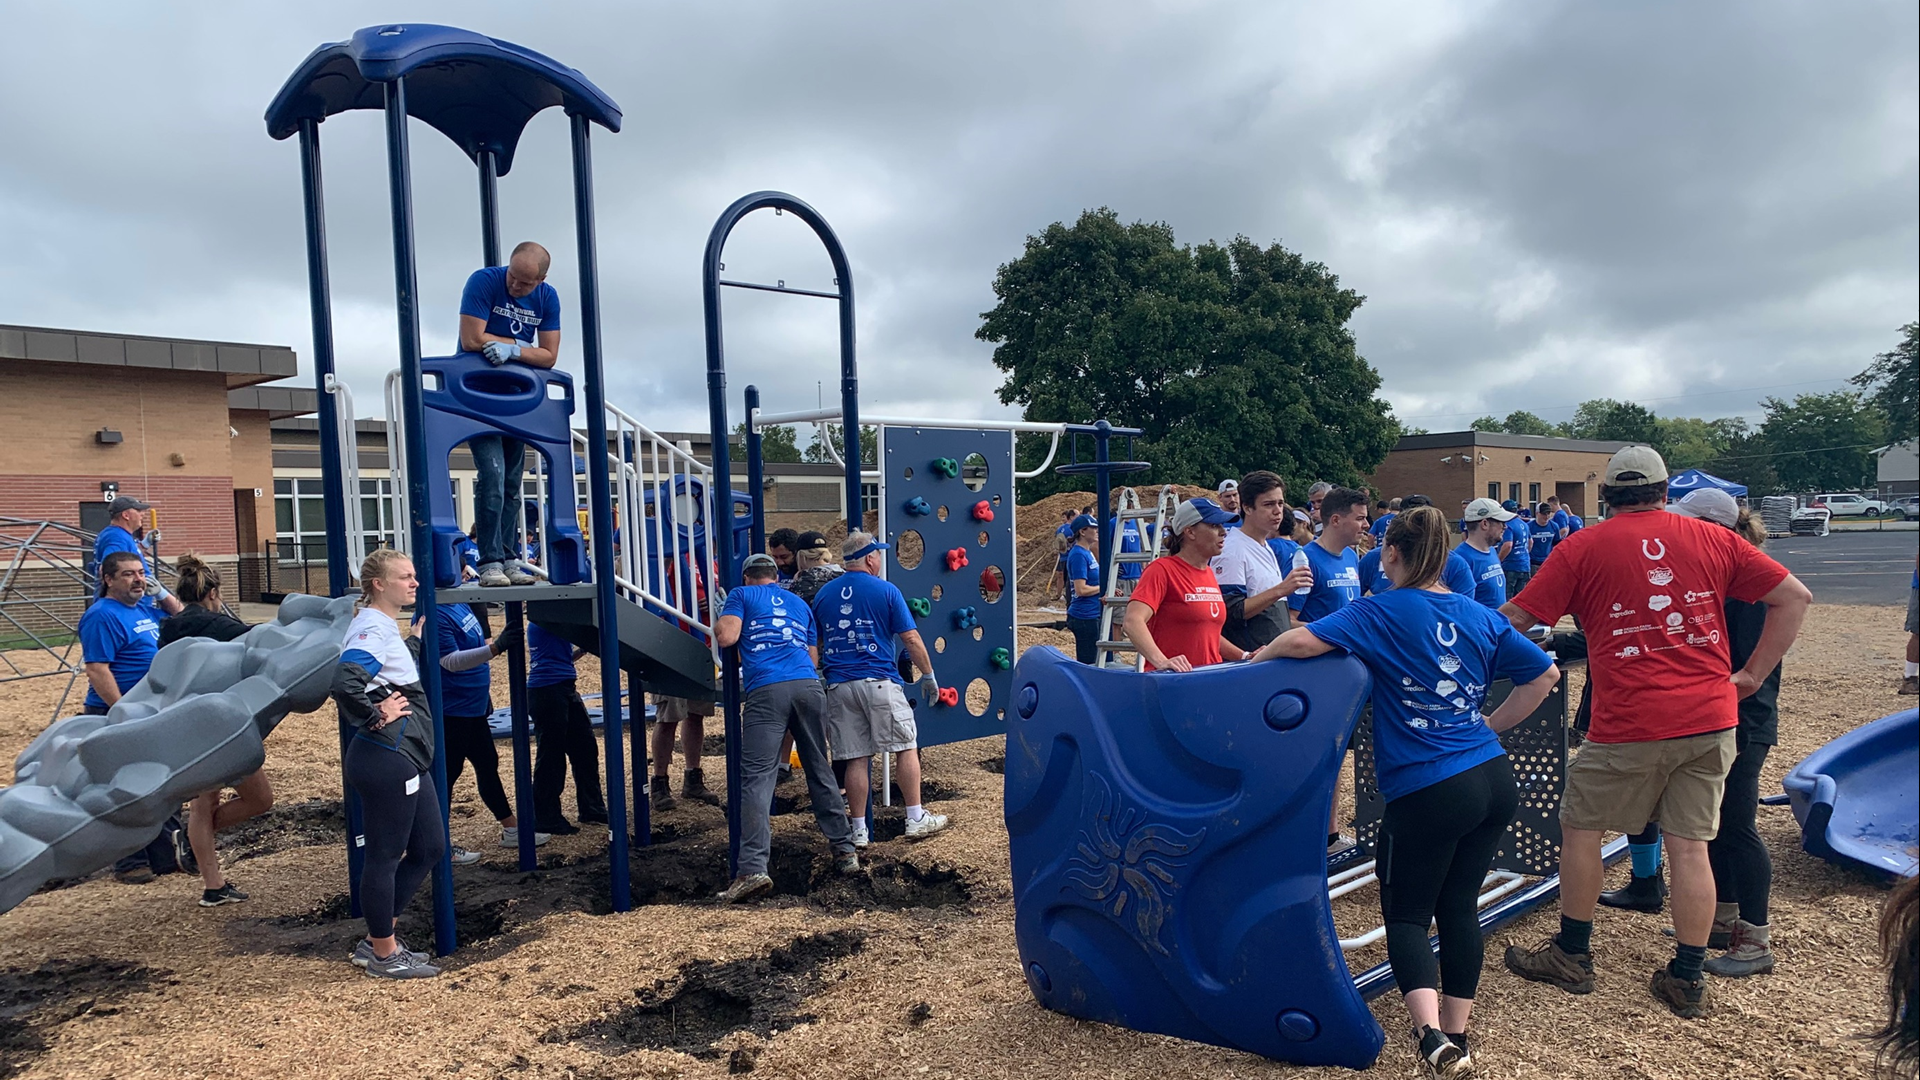 Players and volunteers with the Colts organization helped build a new playground and outdoor classroom at IPS School #99 on their day off.